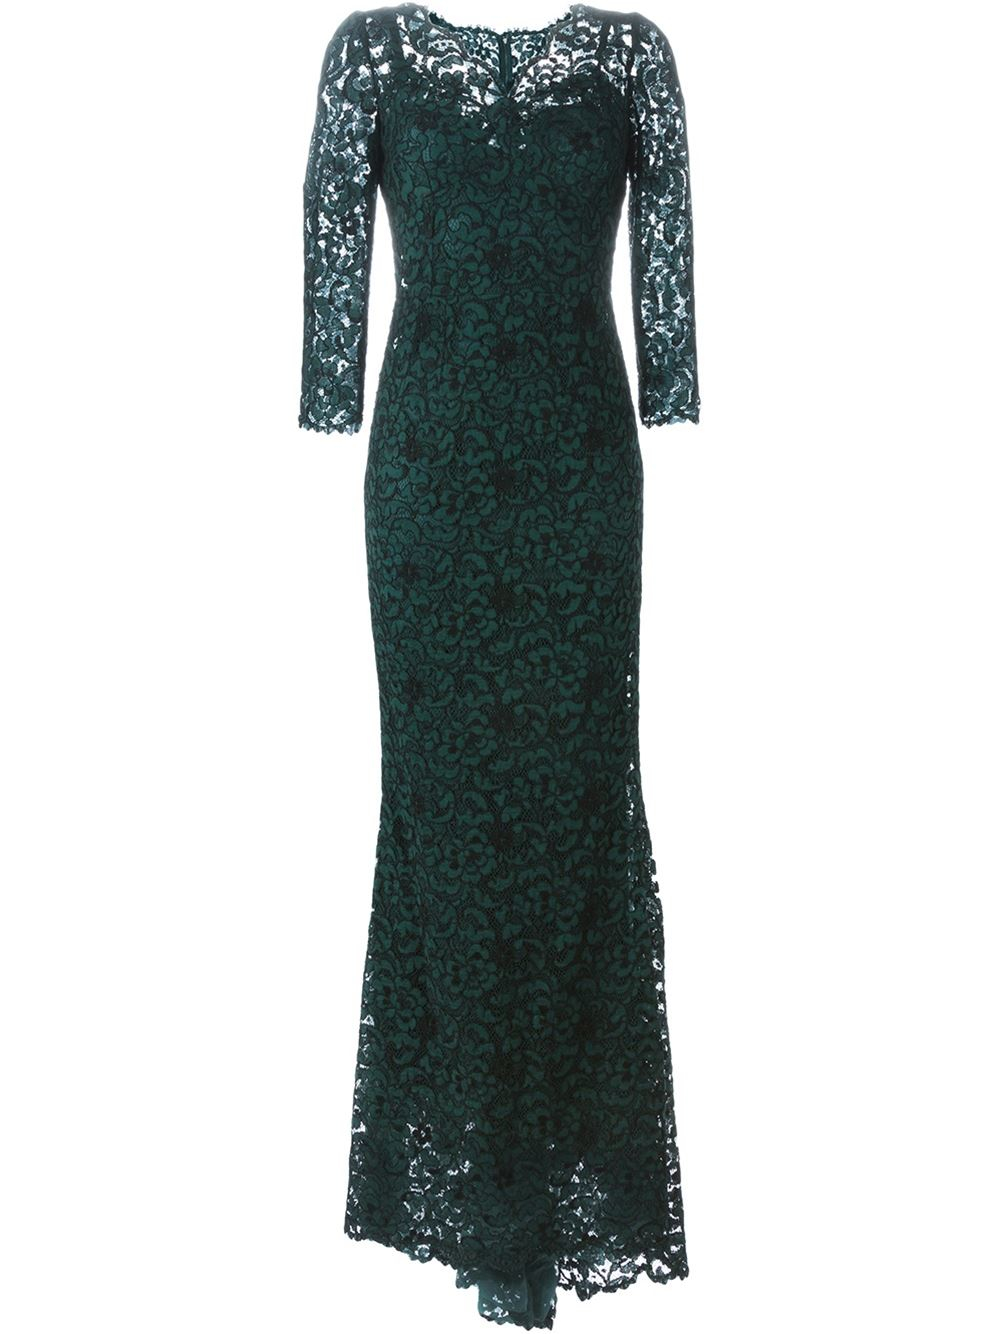 Dolce & gabbana Floral Lace Evening Gown in Green | Lyst